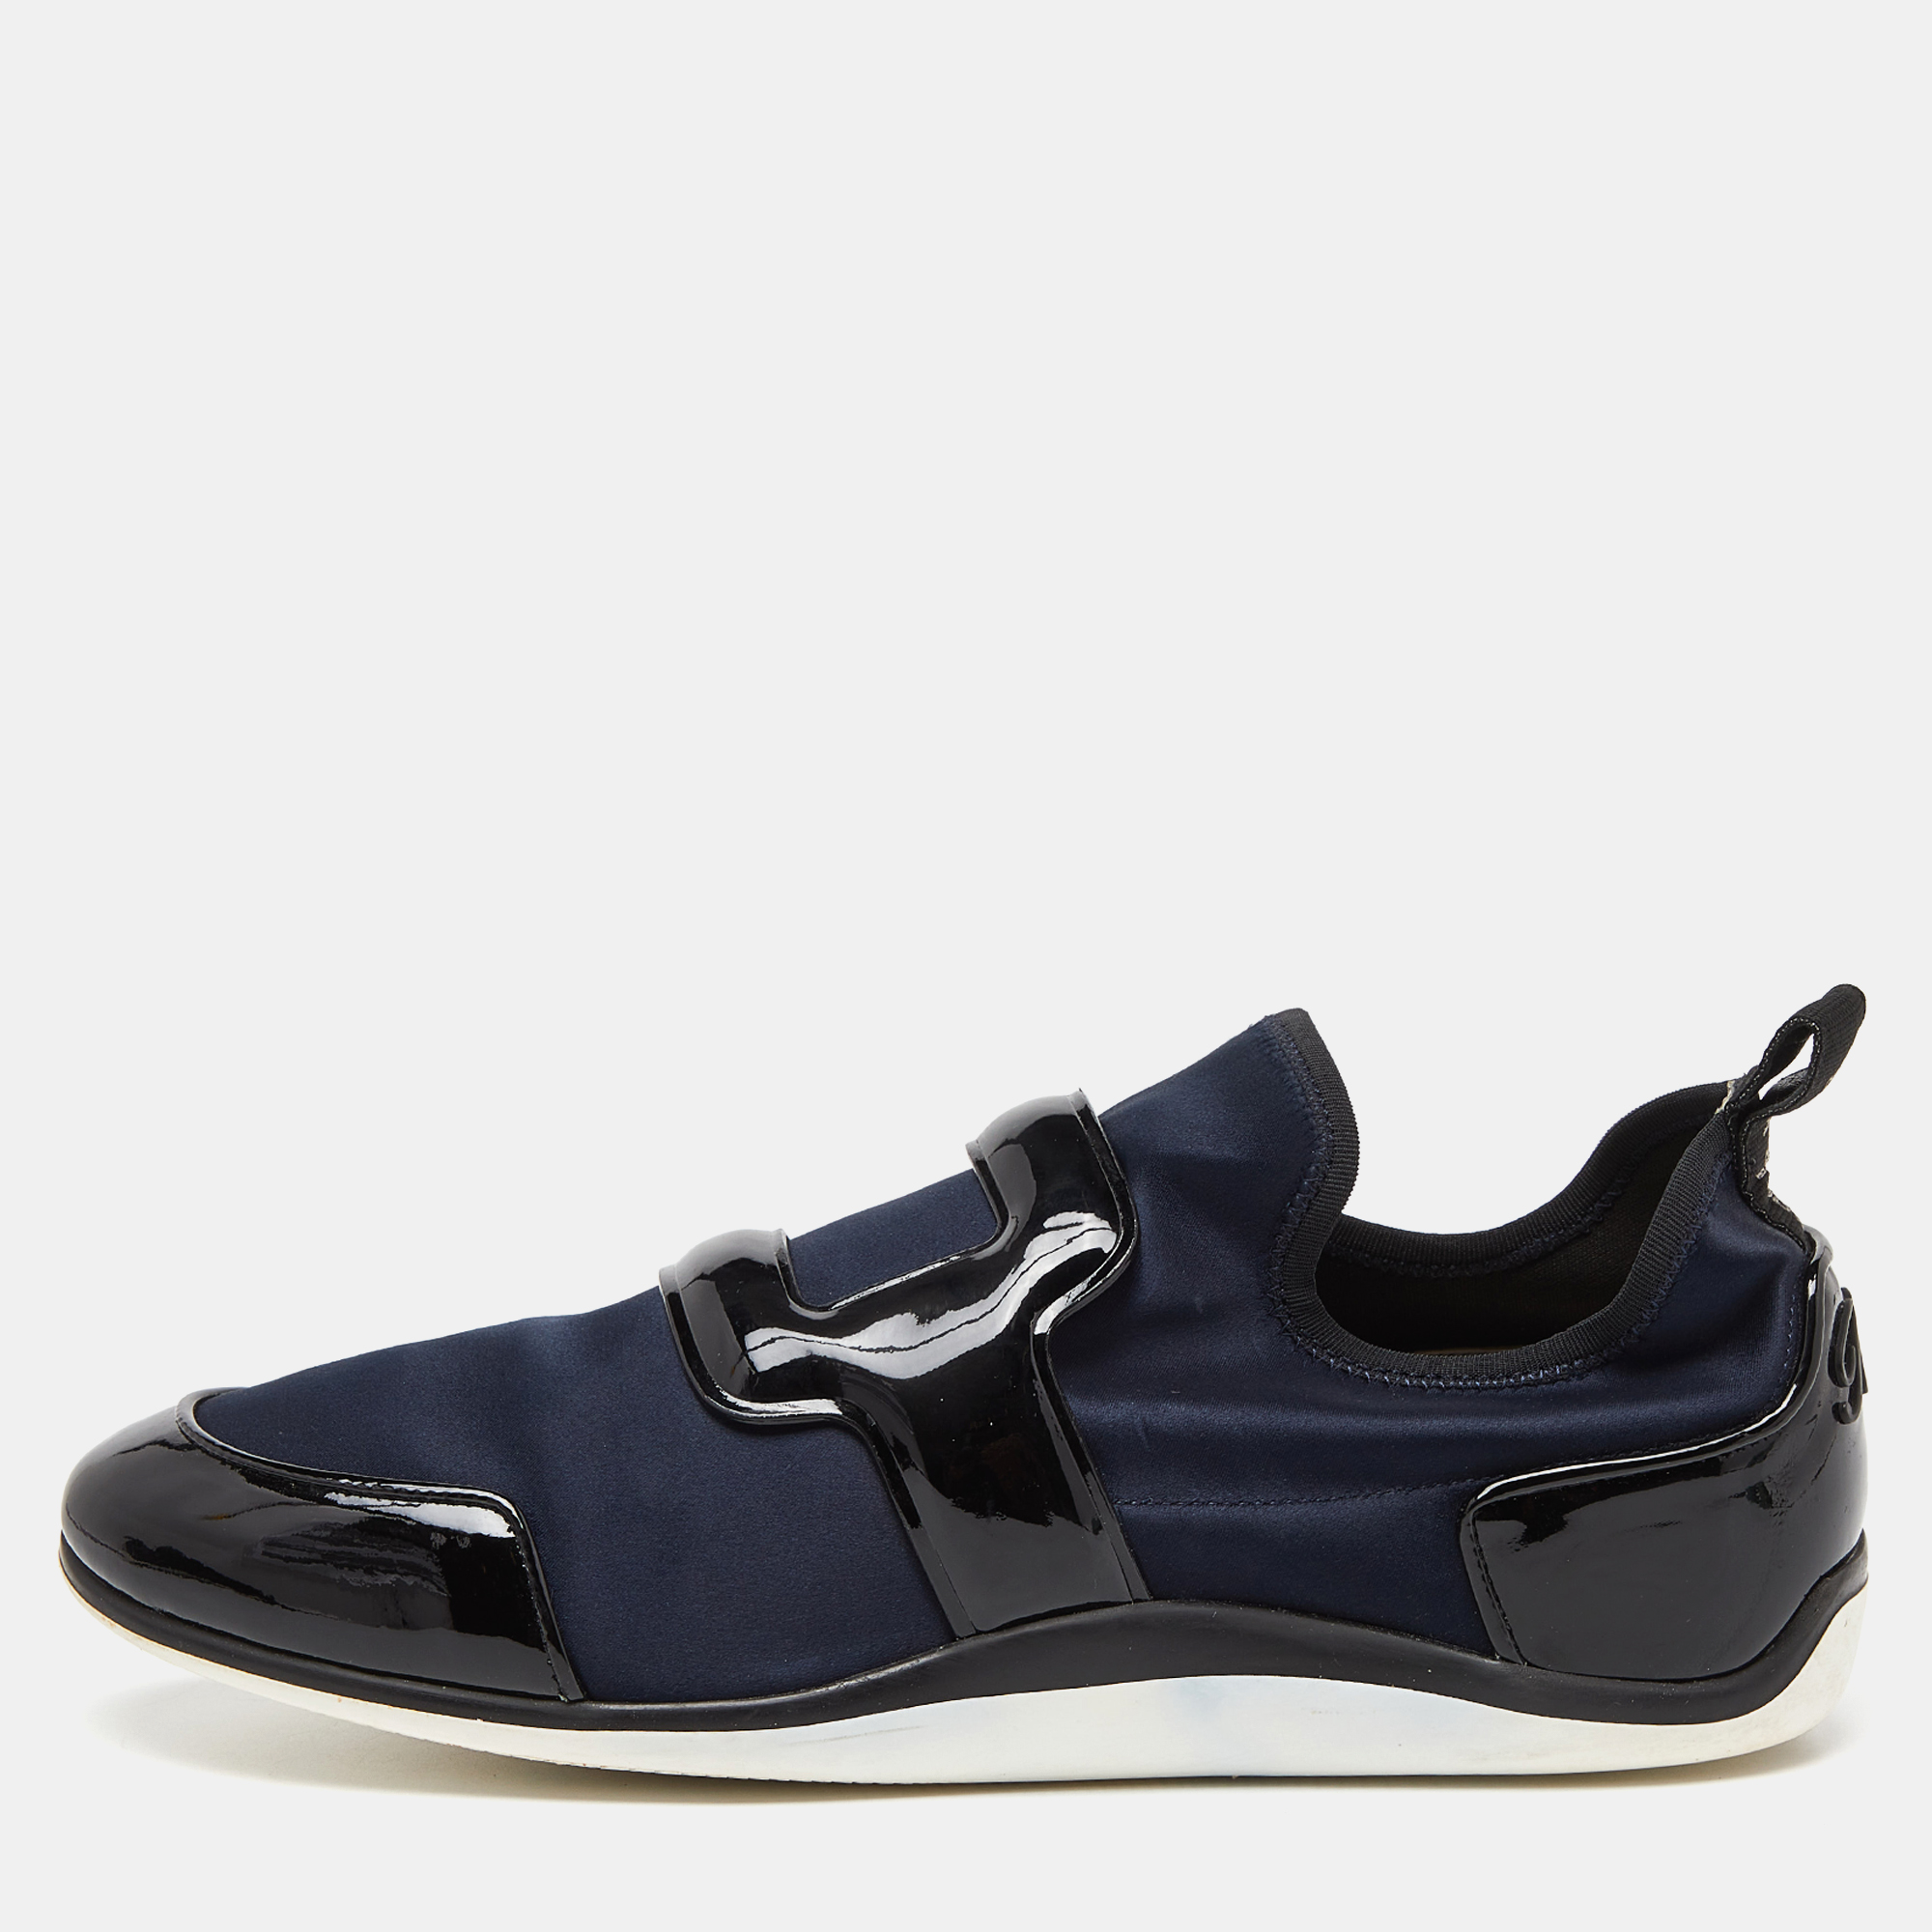 Roger vivier blue/black satin and patent leather sneaky viv slip on sneakers size 39